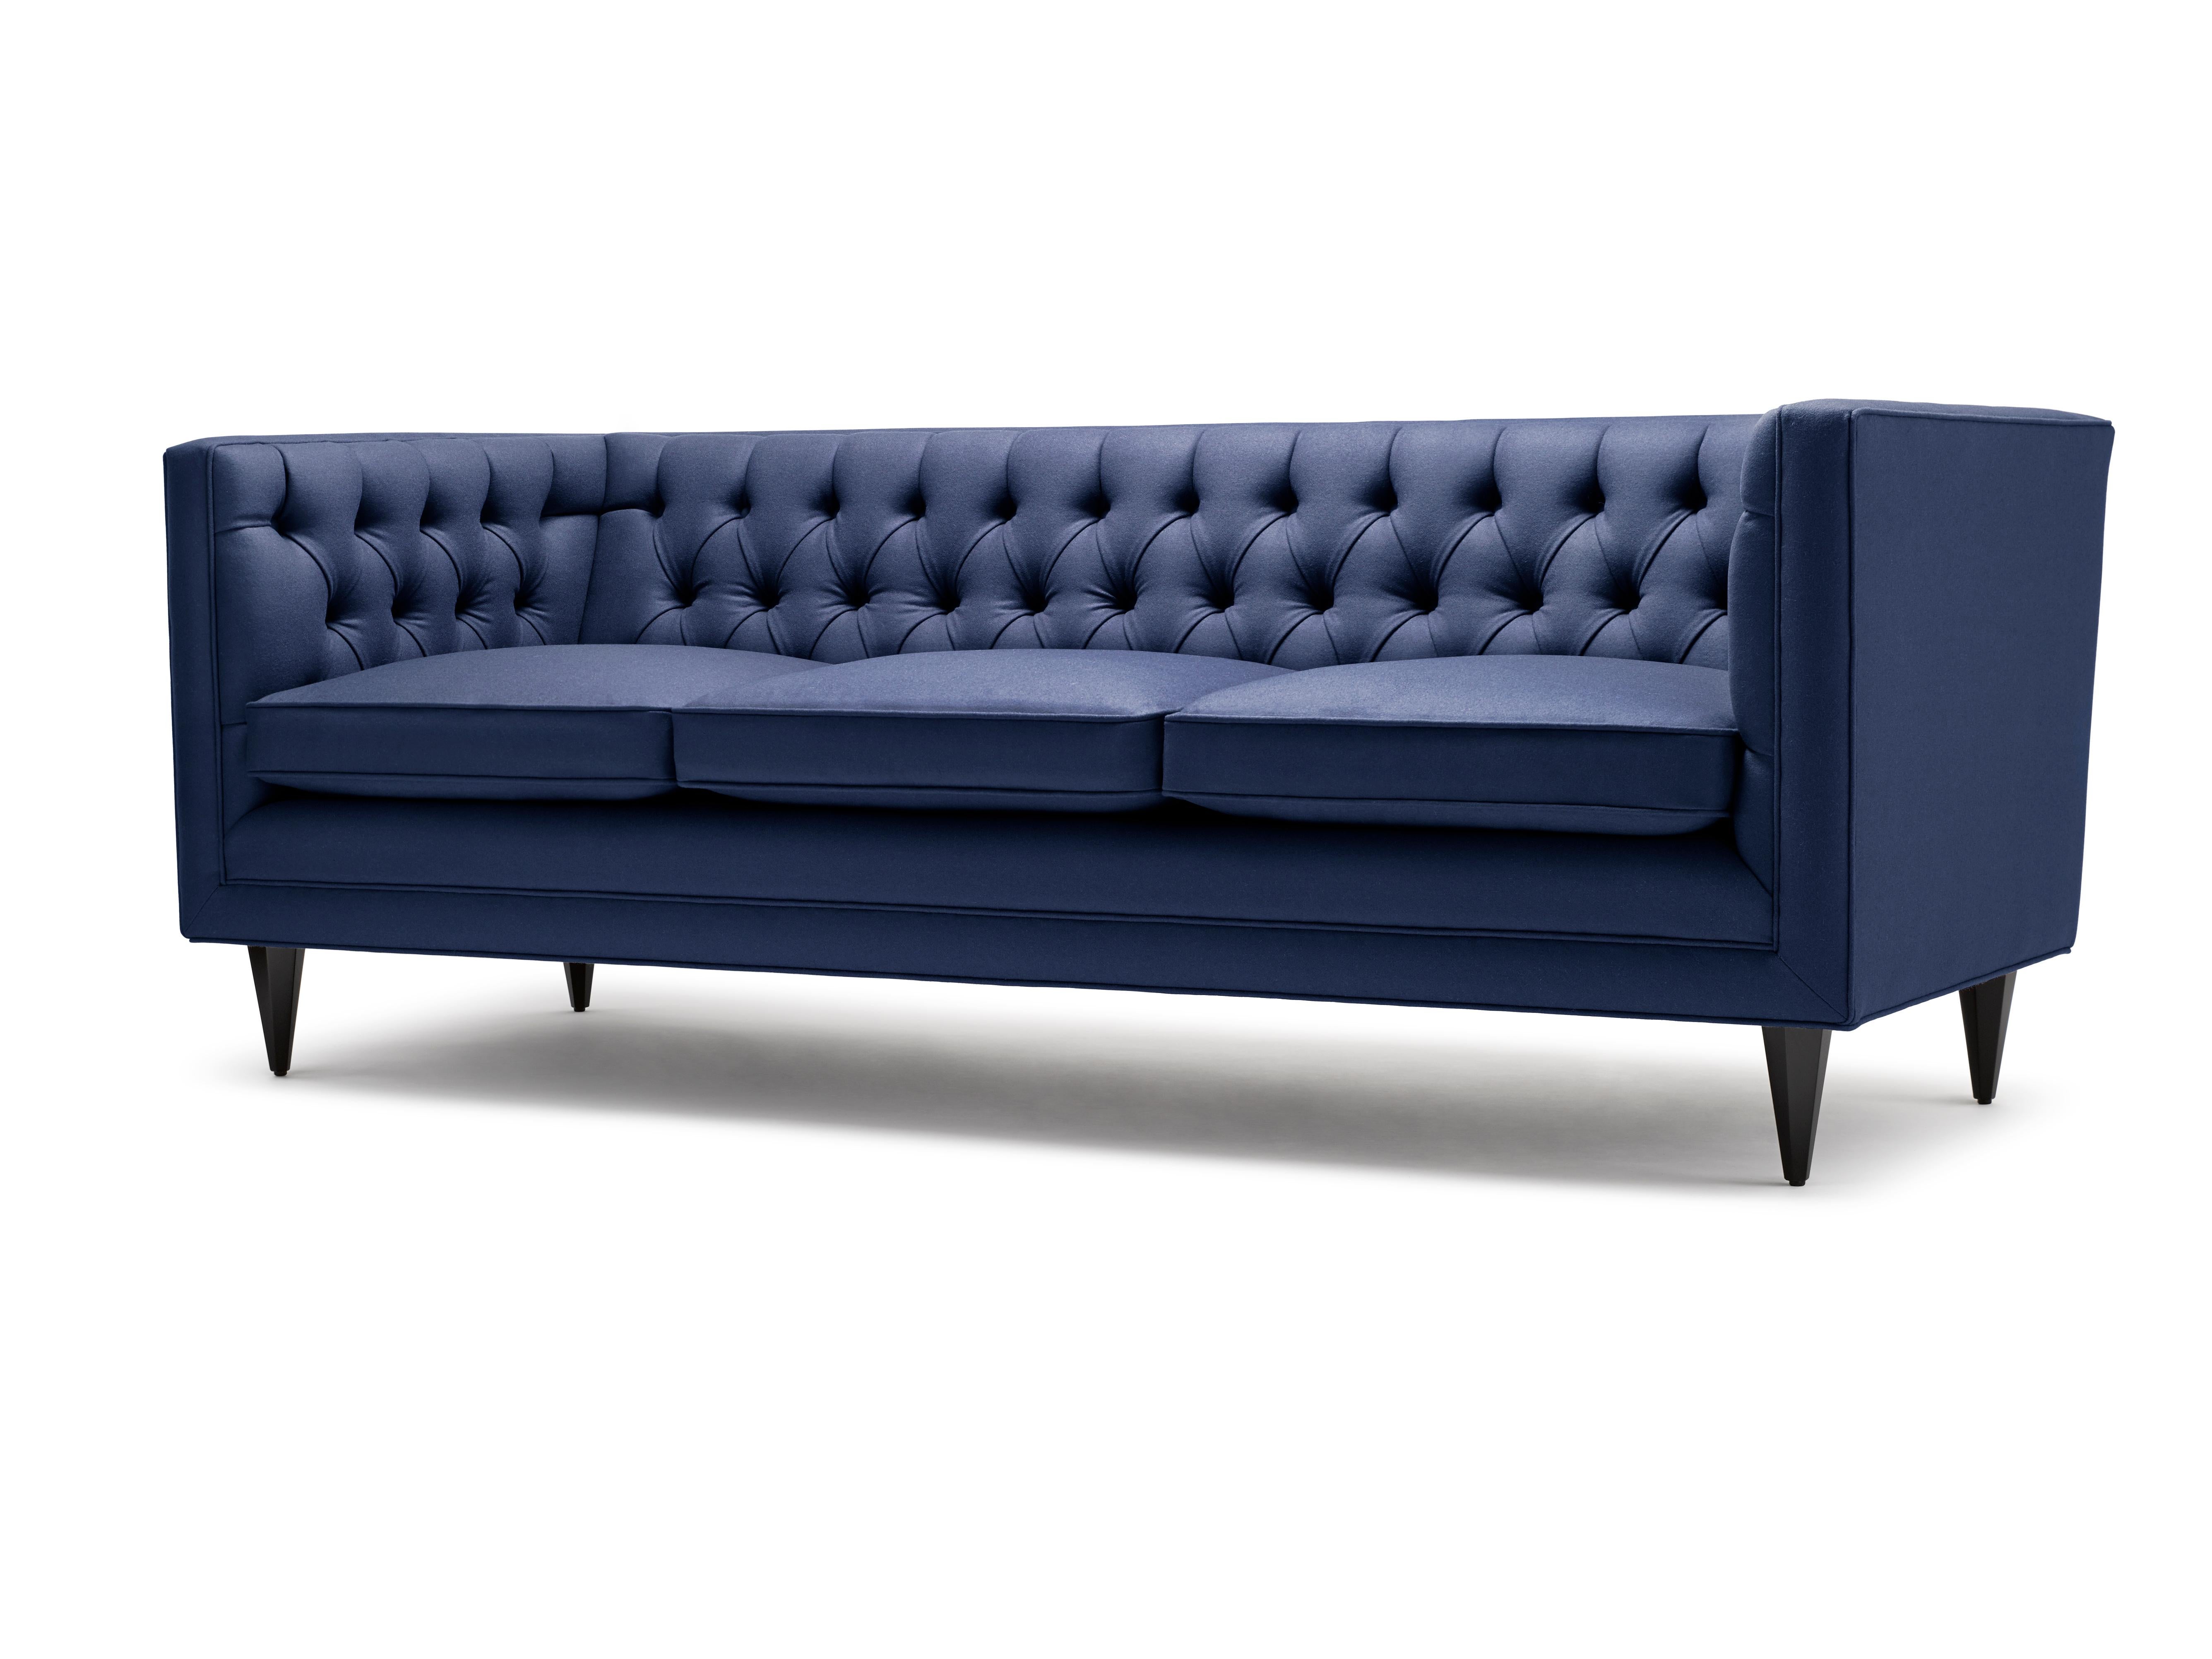 The Tux Lux Sofa compliments the already established Tux range, with the addition of a feather and down wrapped seat cushion it adds softness to the design whilst retaining its formal lines.

Construction: solid beech frame with a coil sprung seat